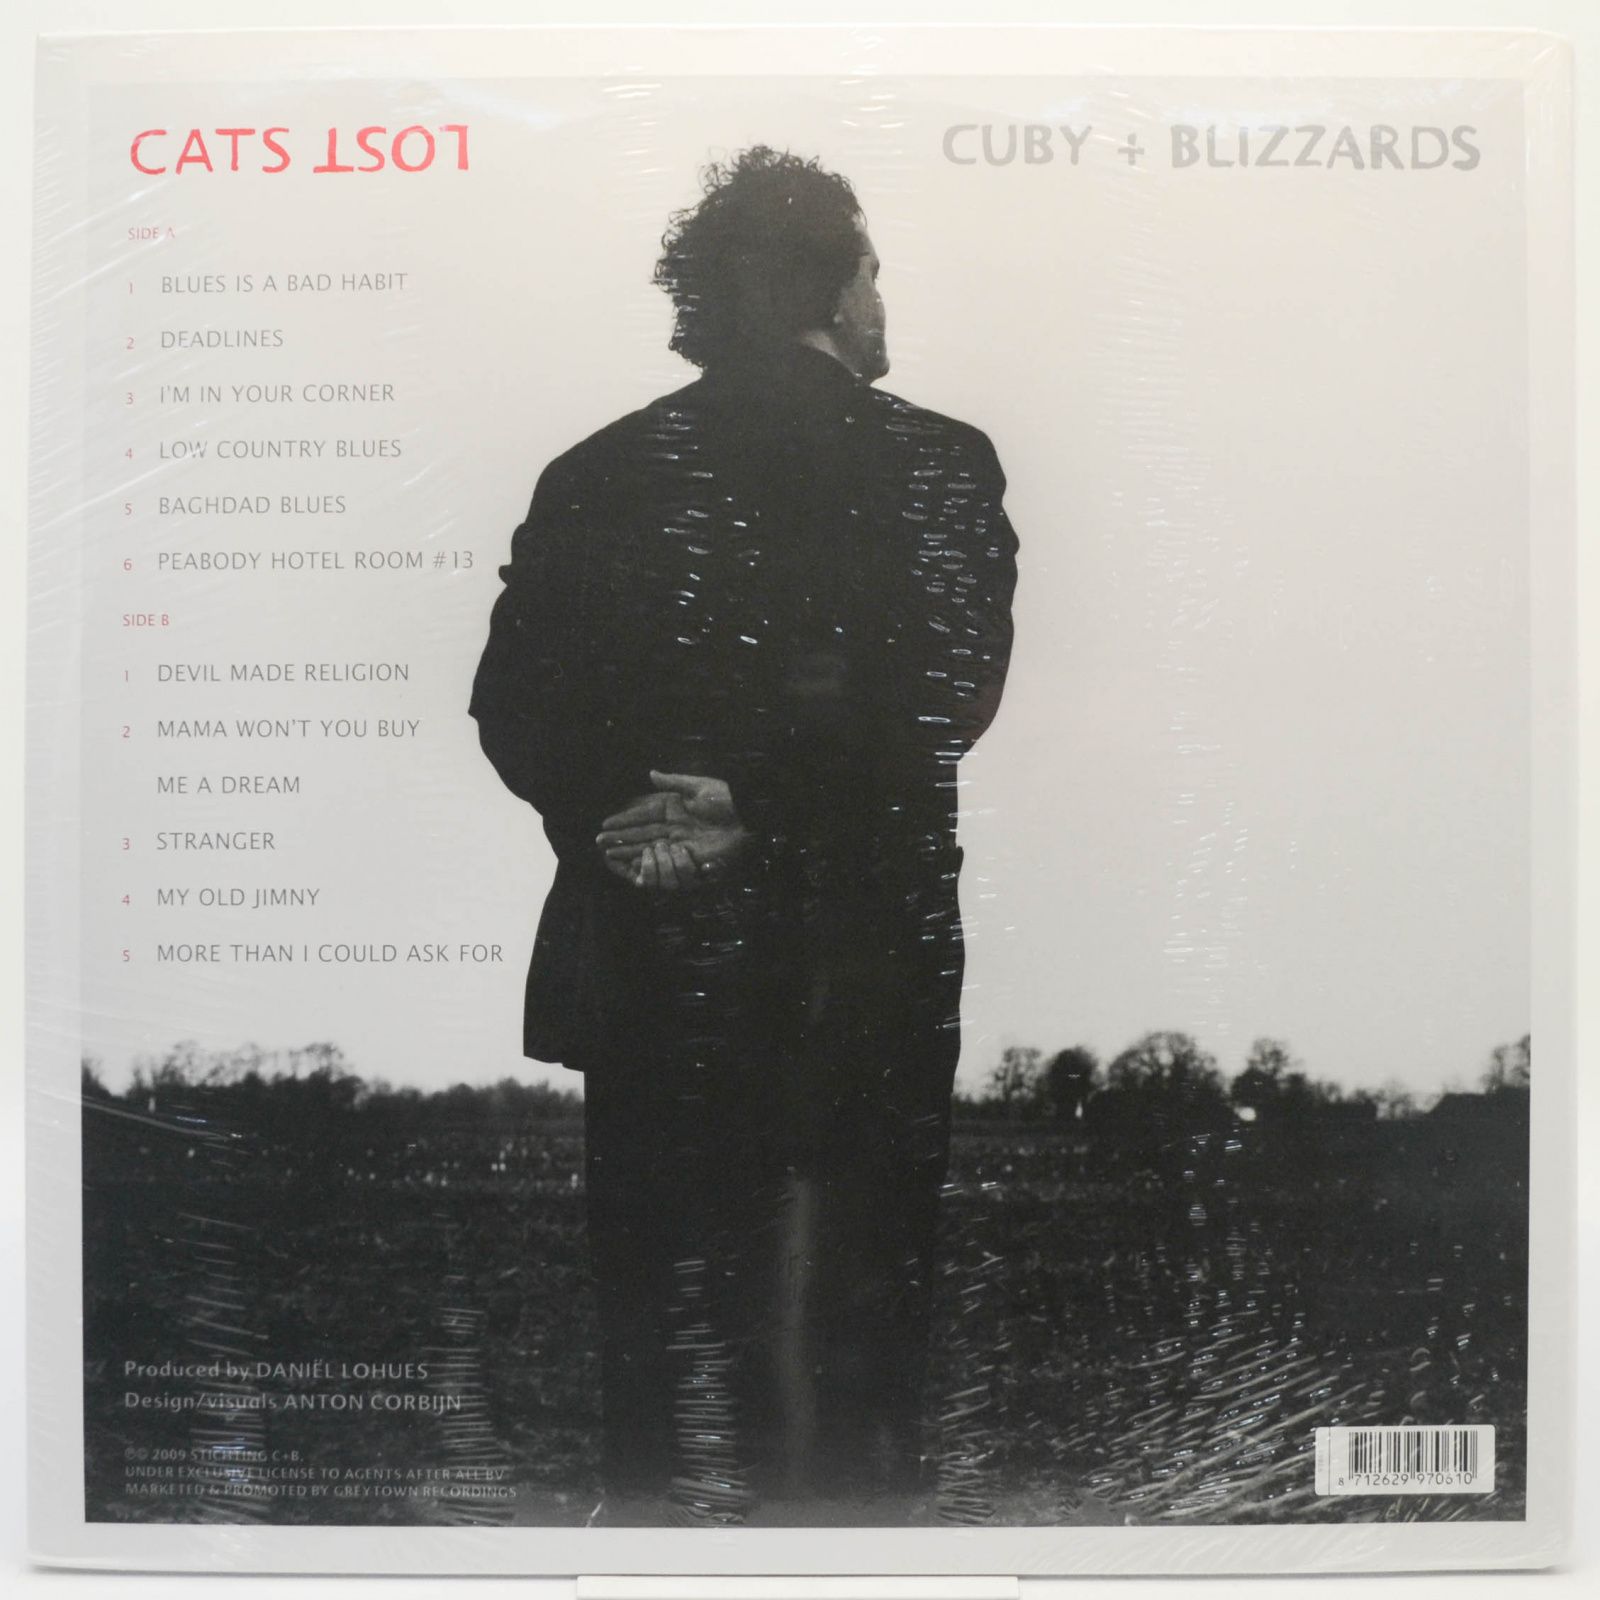 Cuby + Blizzards — Cats Lost (1-st, Holland), 2009